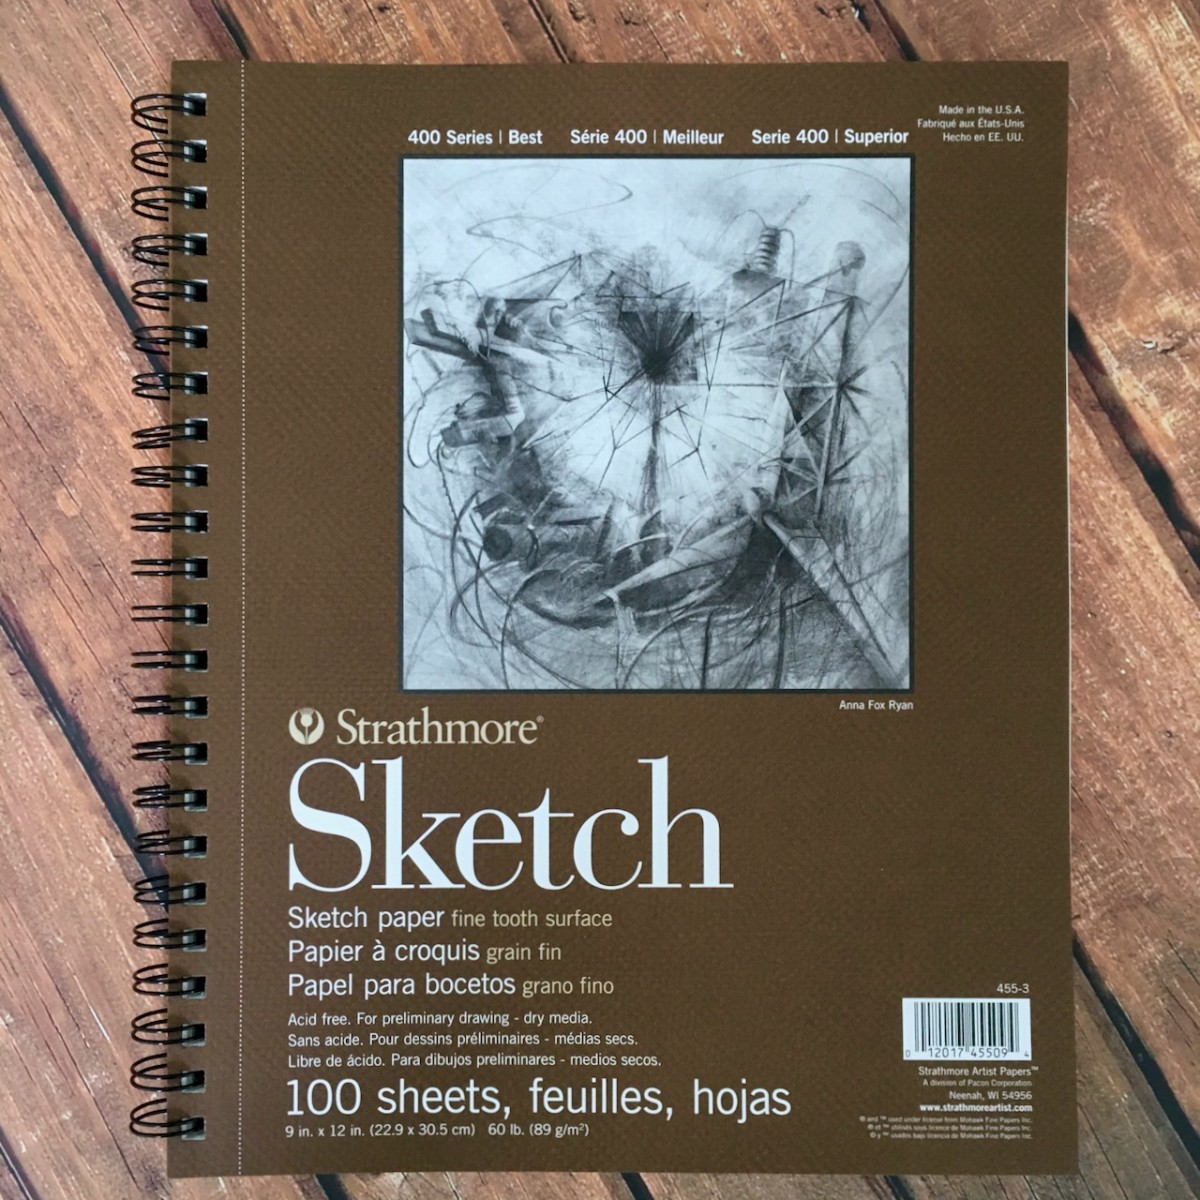 Top 14 Drawing Supplies For Beginners, Essential Tools for Artists